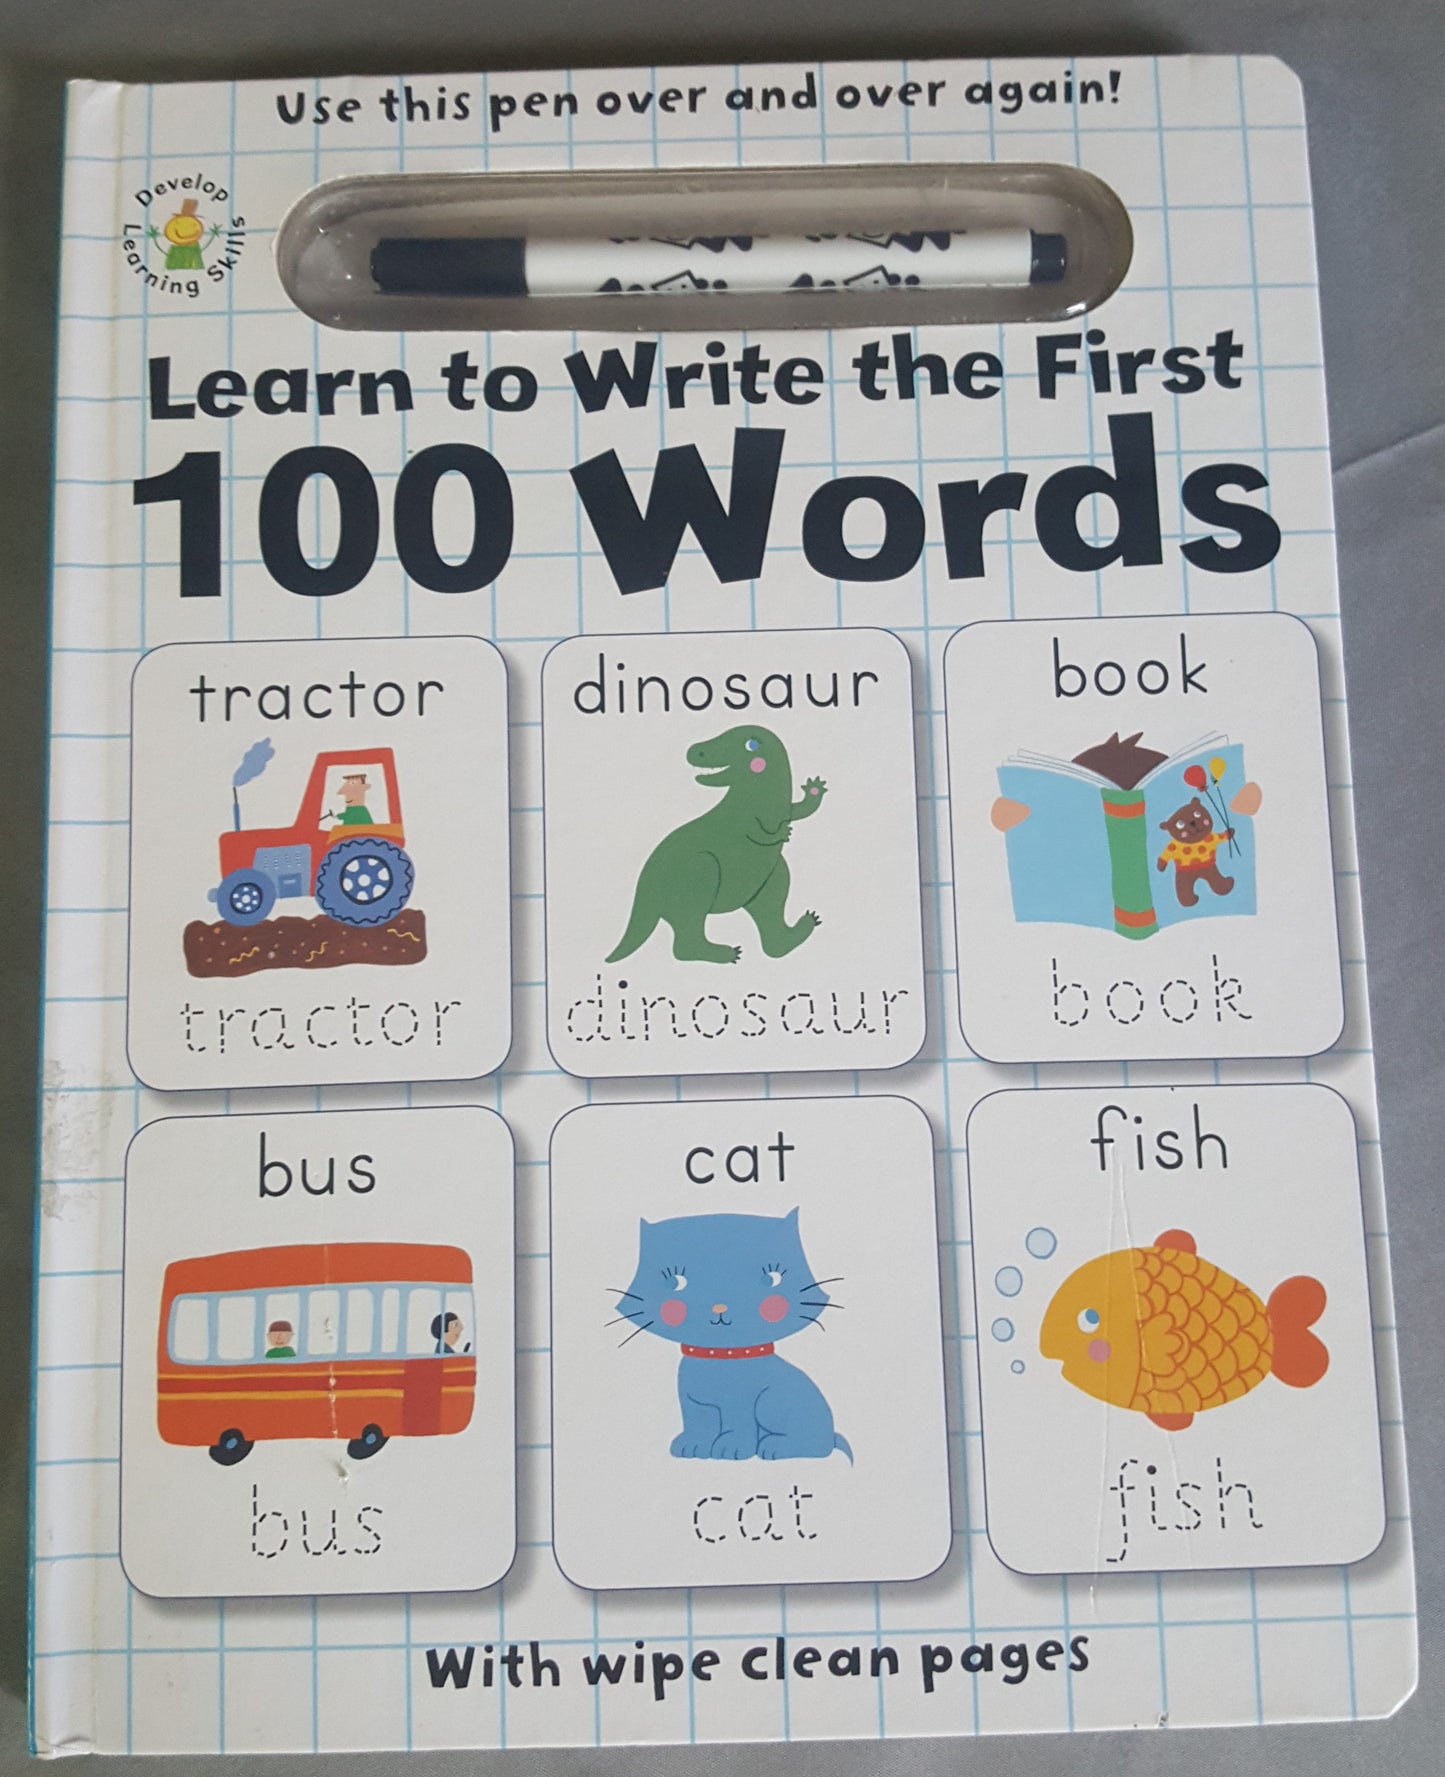 Learn to Write the First 100 Words – wipe clean pages